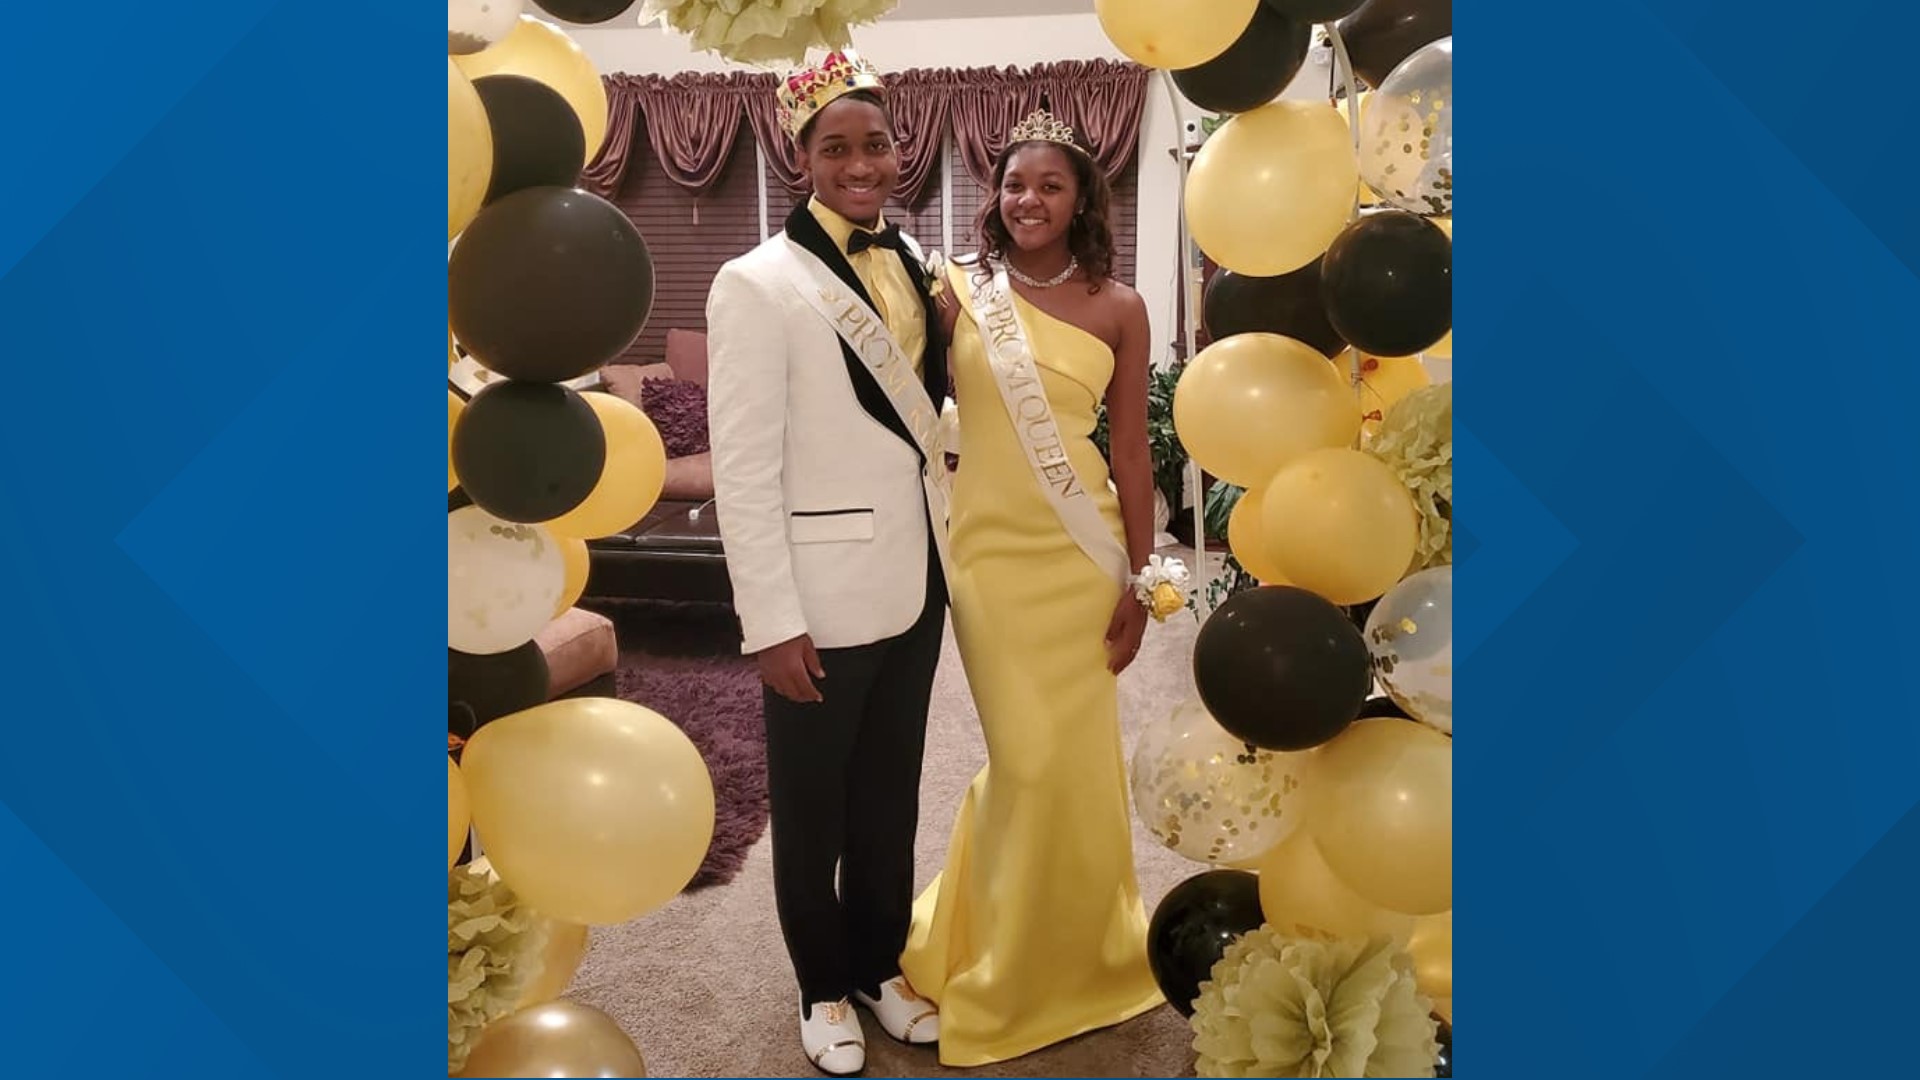 Tasha Clark-Roberts was bummed that prom was canceled for her daughter Deona. So, she put together a prom in her own home for Deona and her boyfriend, Javier.